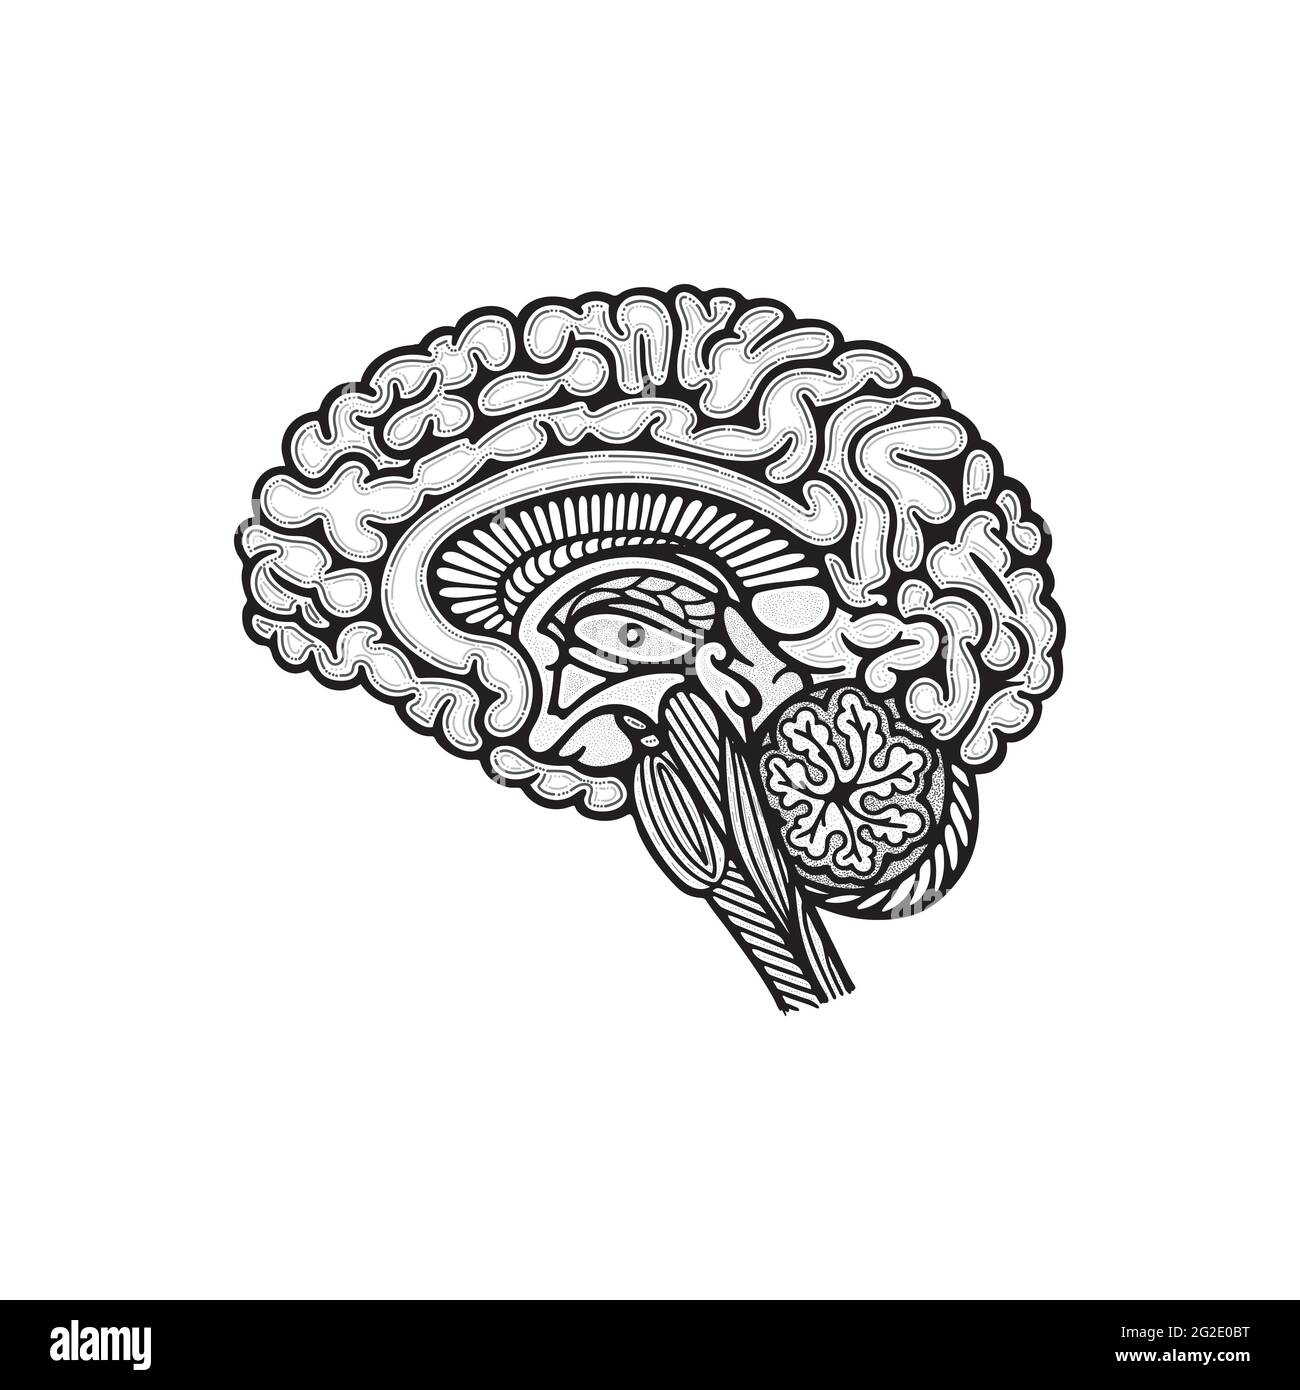 Brain side view cross section. Human brain cross cut hand drawn vector illustration. Brain outline drawing. Part of set. Stock Vector